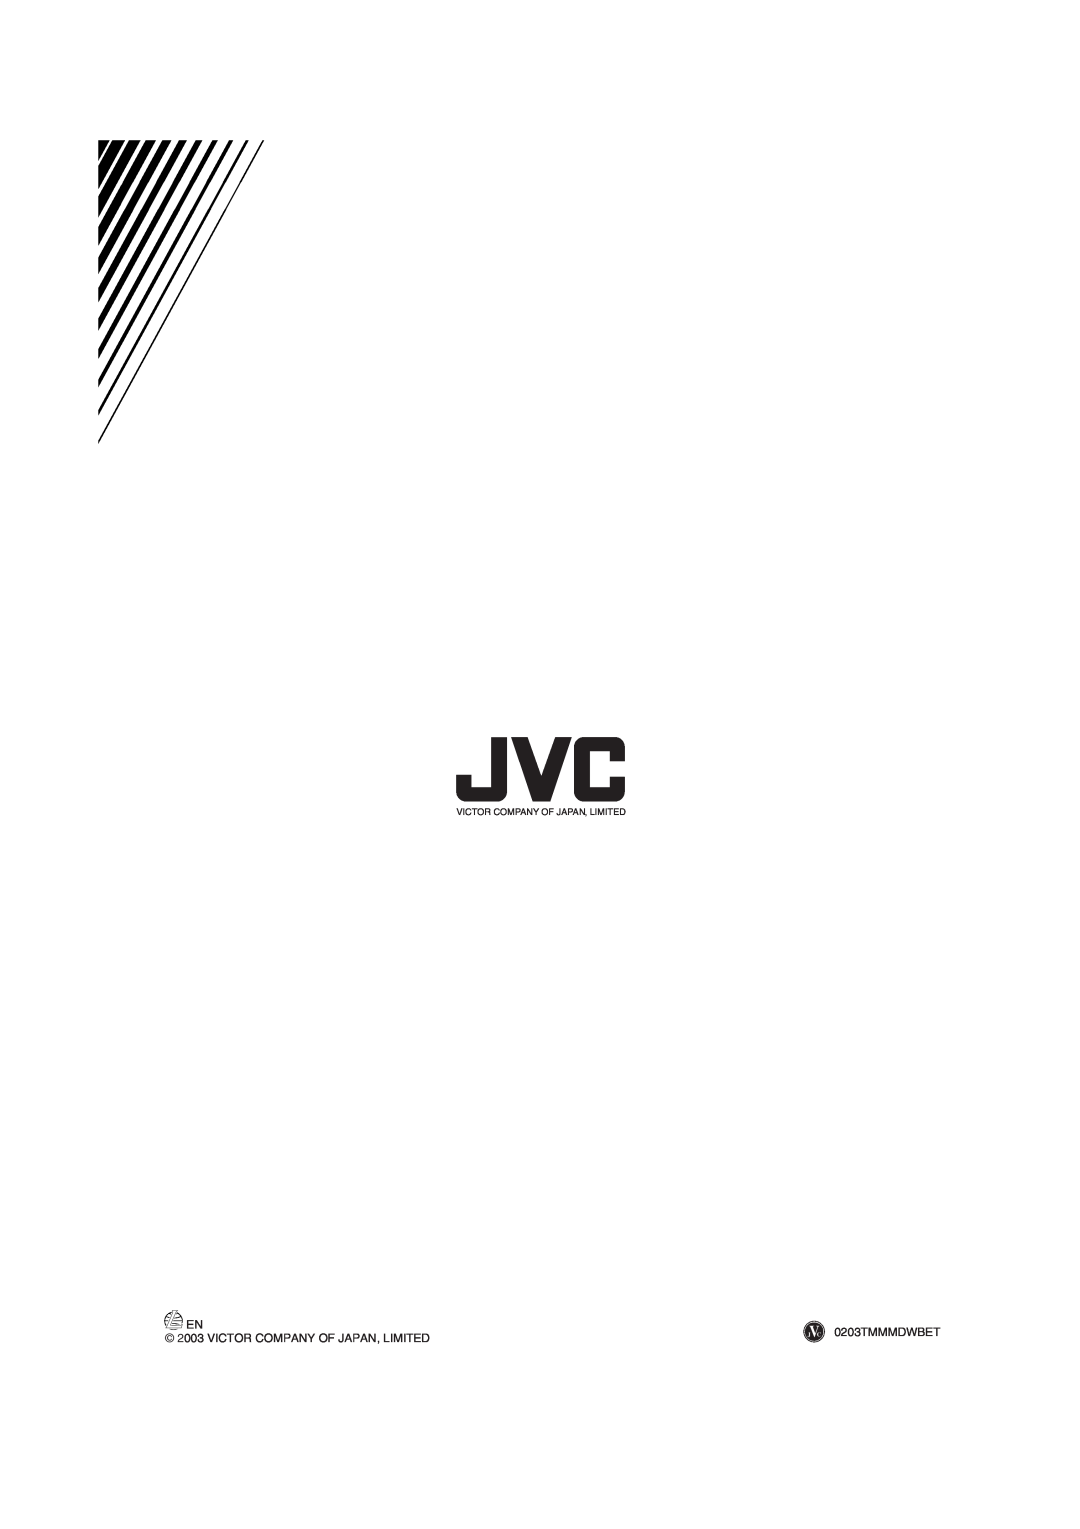 JVC TH-A32 manual 0203TMMMDWBET, Victor Company Of Japan, Limited 